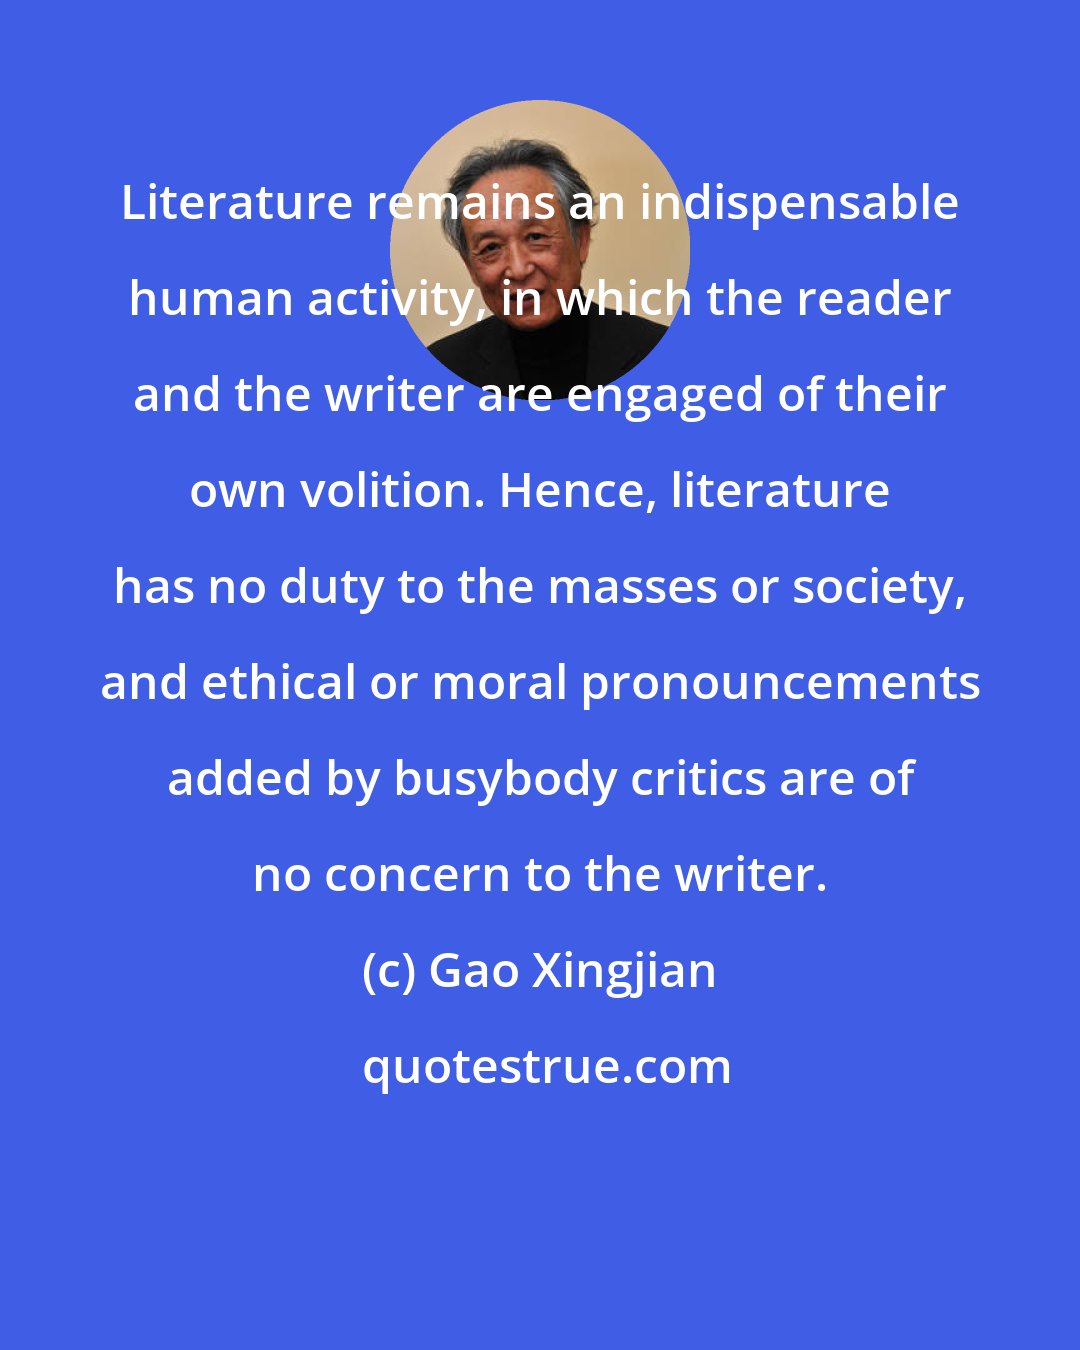 Gao Xingjian: Literature remains an indispensable human activity, in which the reader and the writer are engaged of their own volition. Hence, literature has no duty to the masses or society, and ethical or moral pronouncements added by busybody critics are of no concern to the writer.